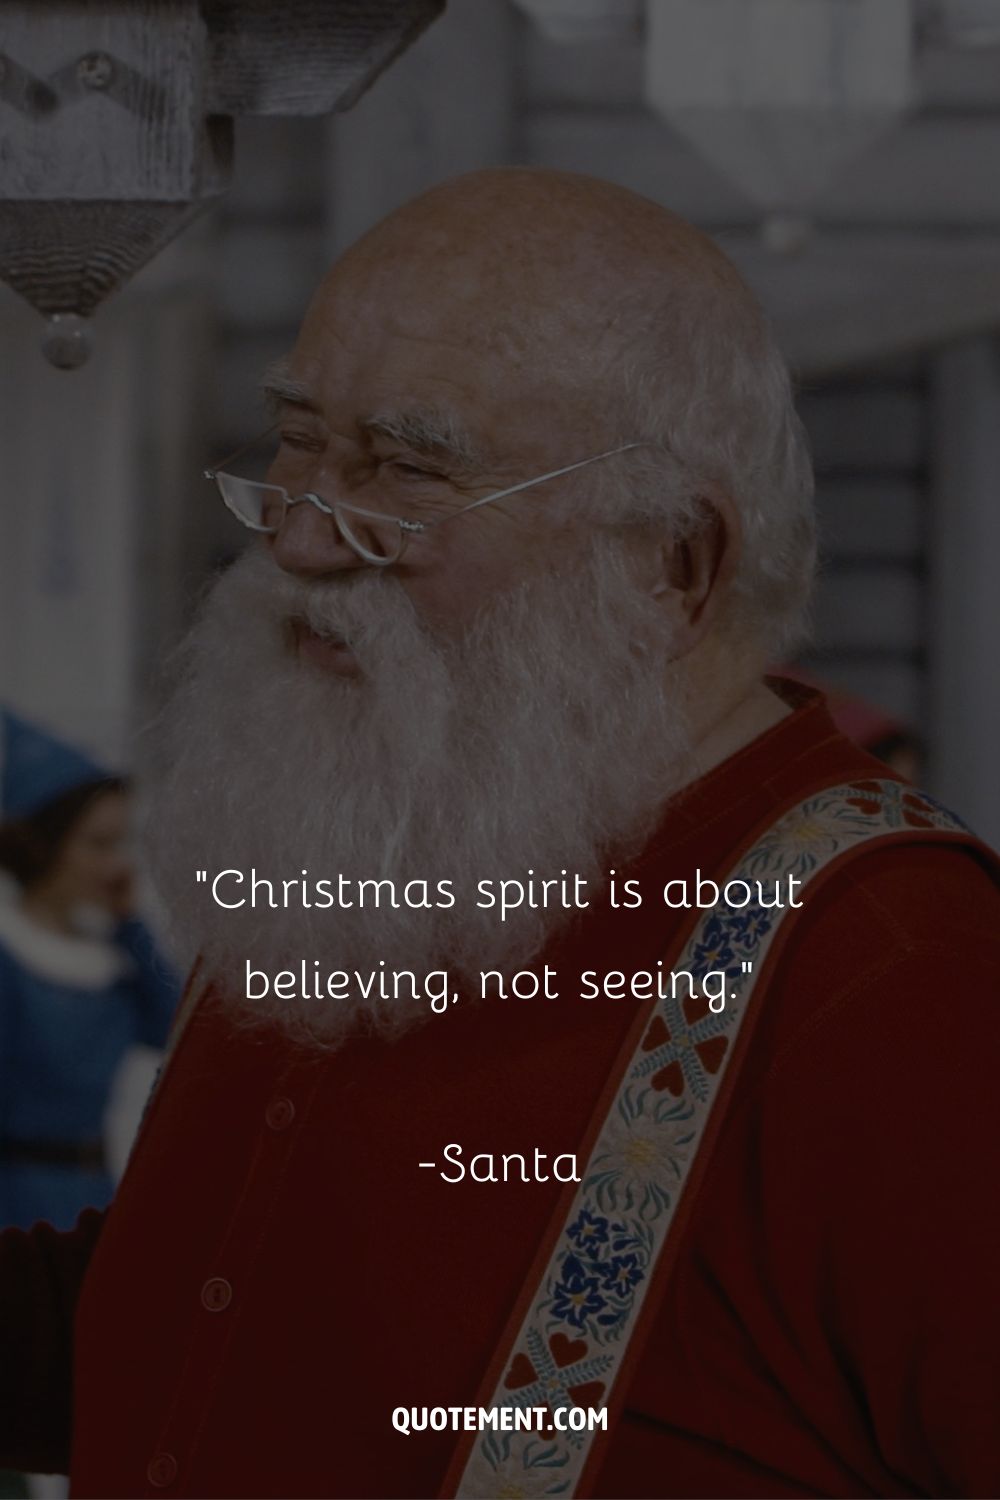 Image of Santa Claus representing the best quote from Elf movie.